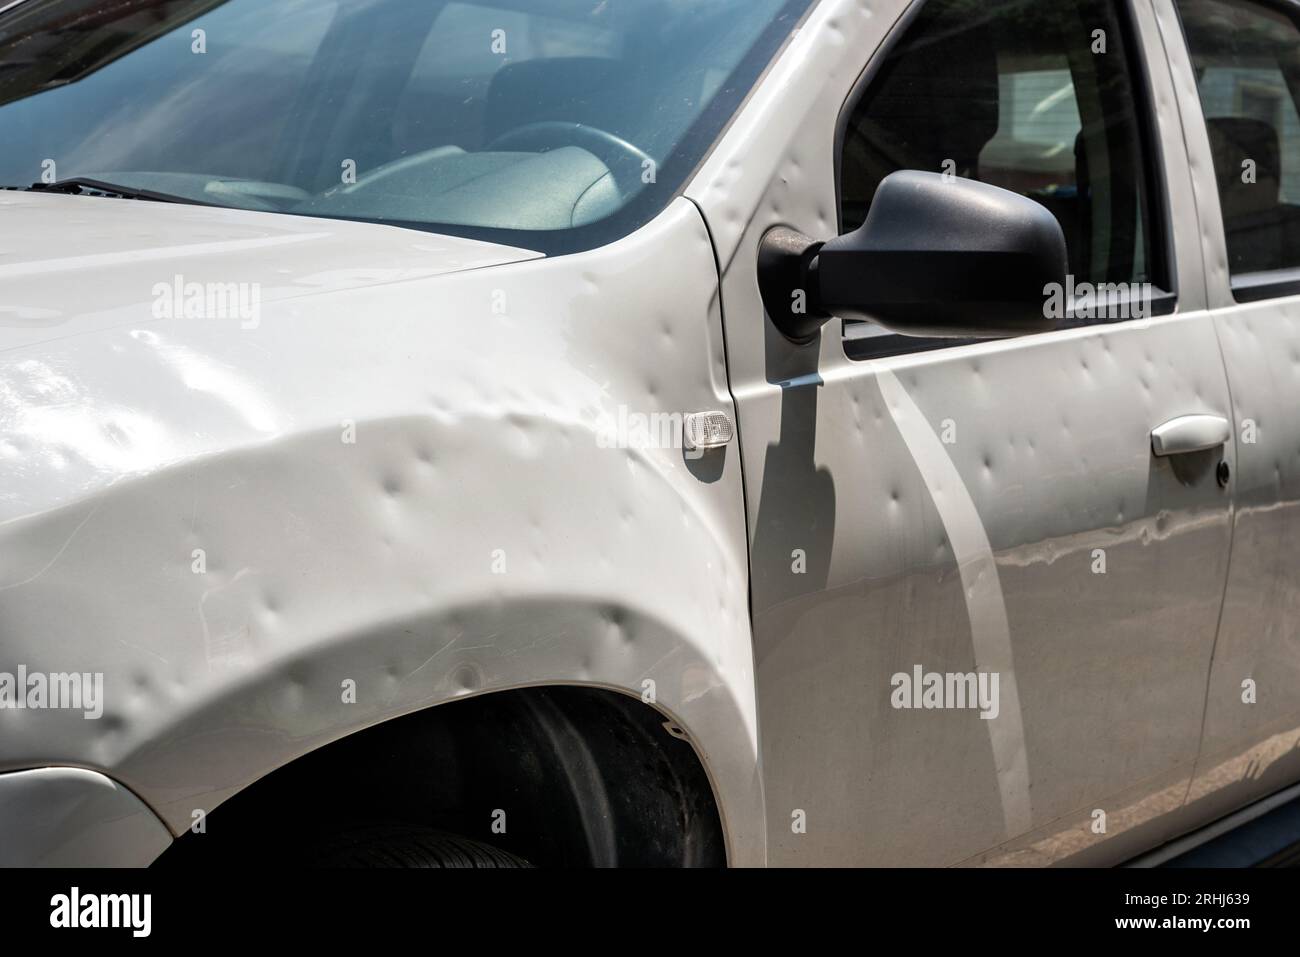 Damaged white car with many dents parked on city street on sunny day after hailstorm Stock Photo